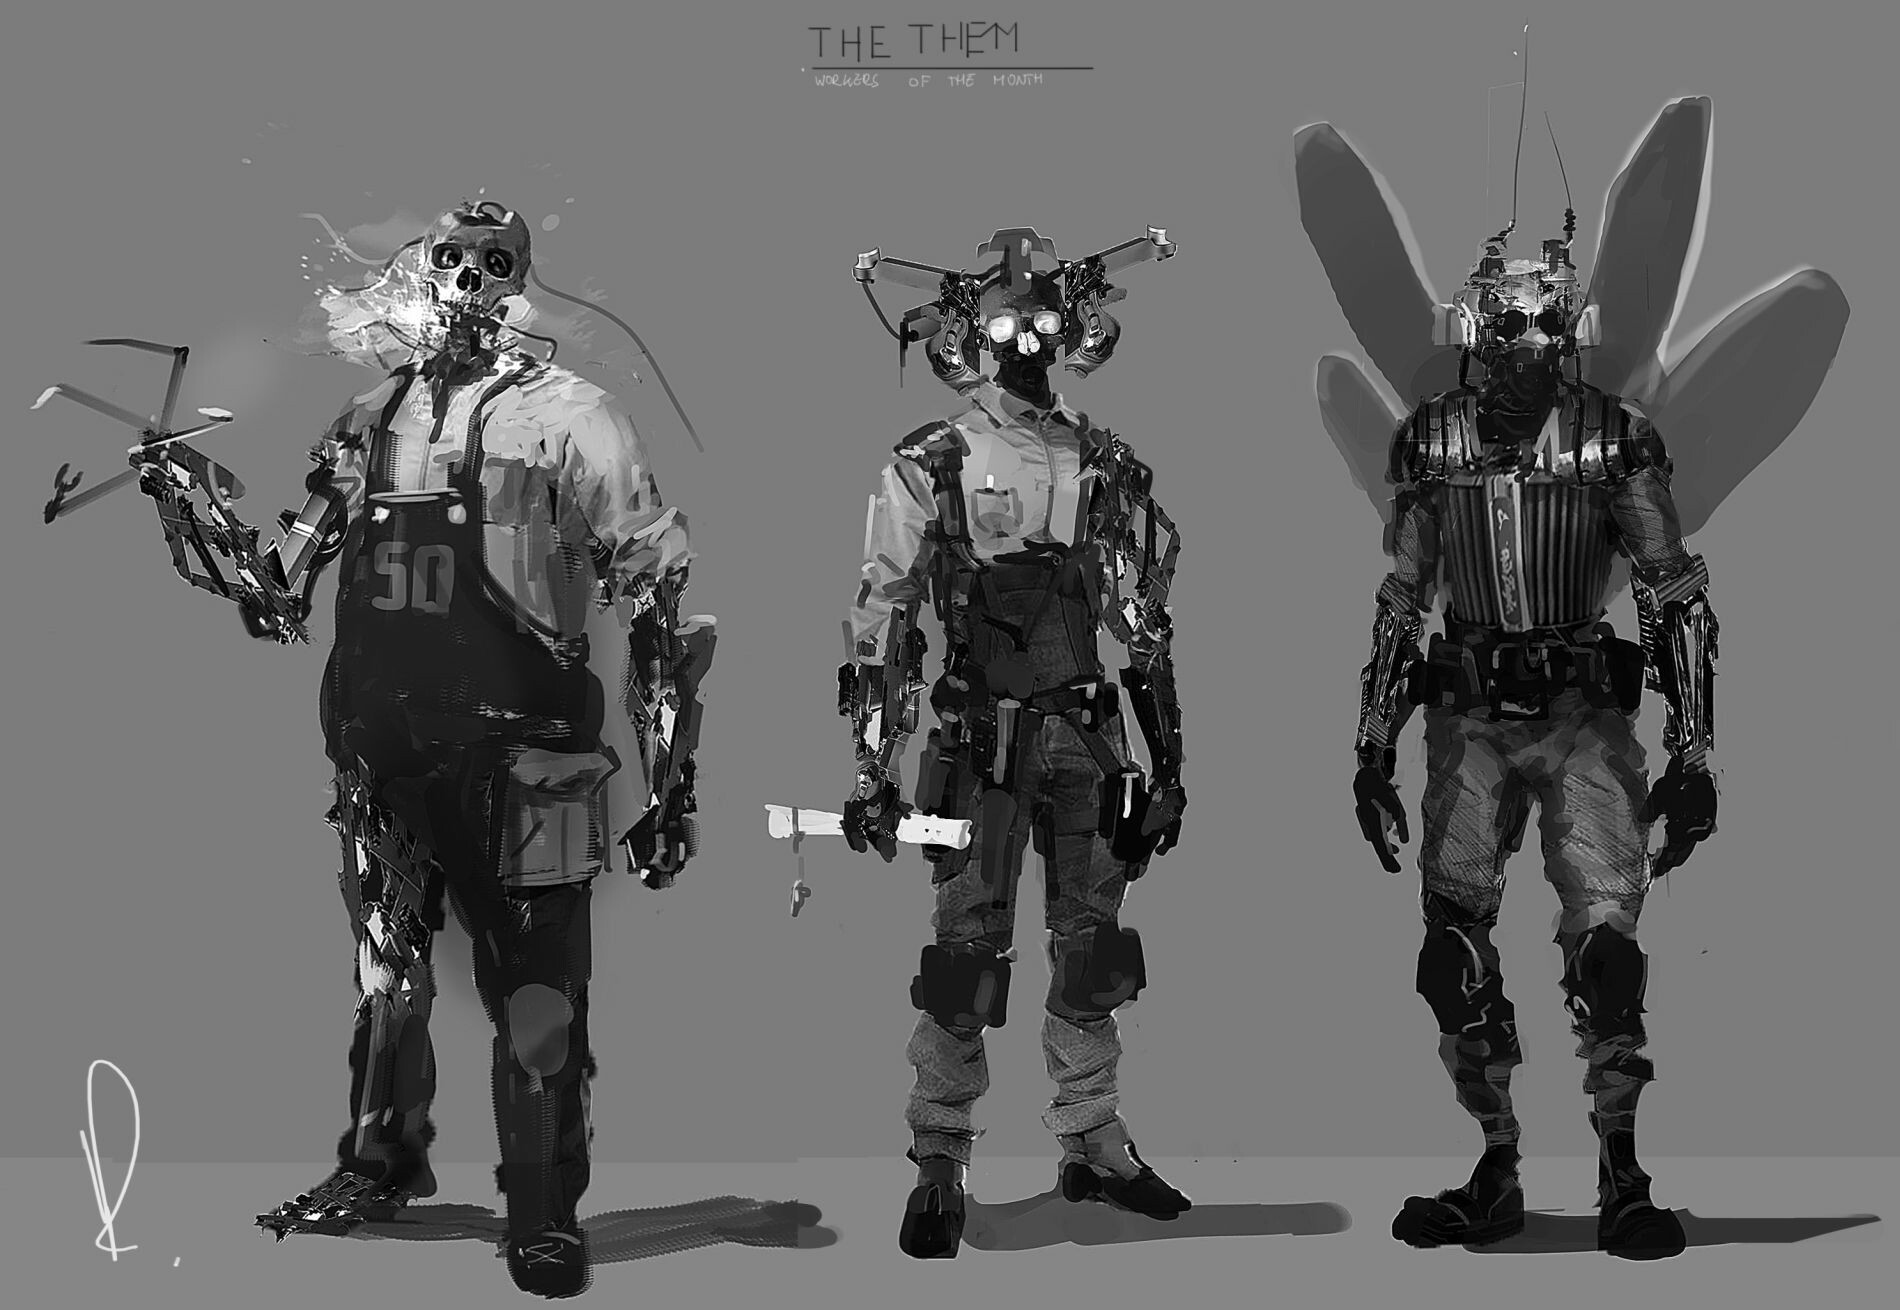 ArtStation - The Them - workers of the month